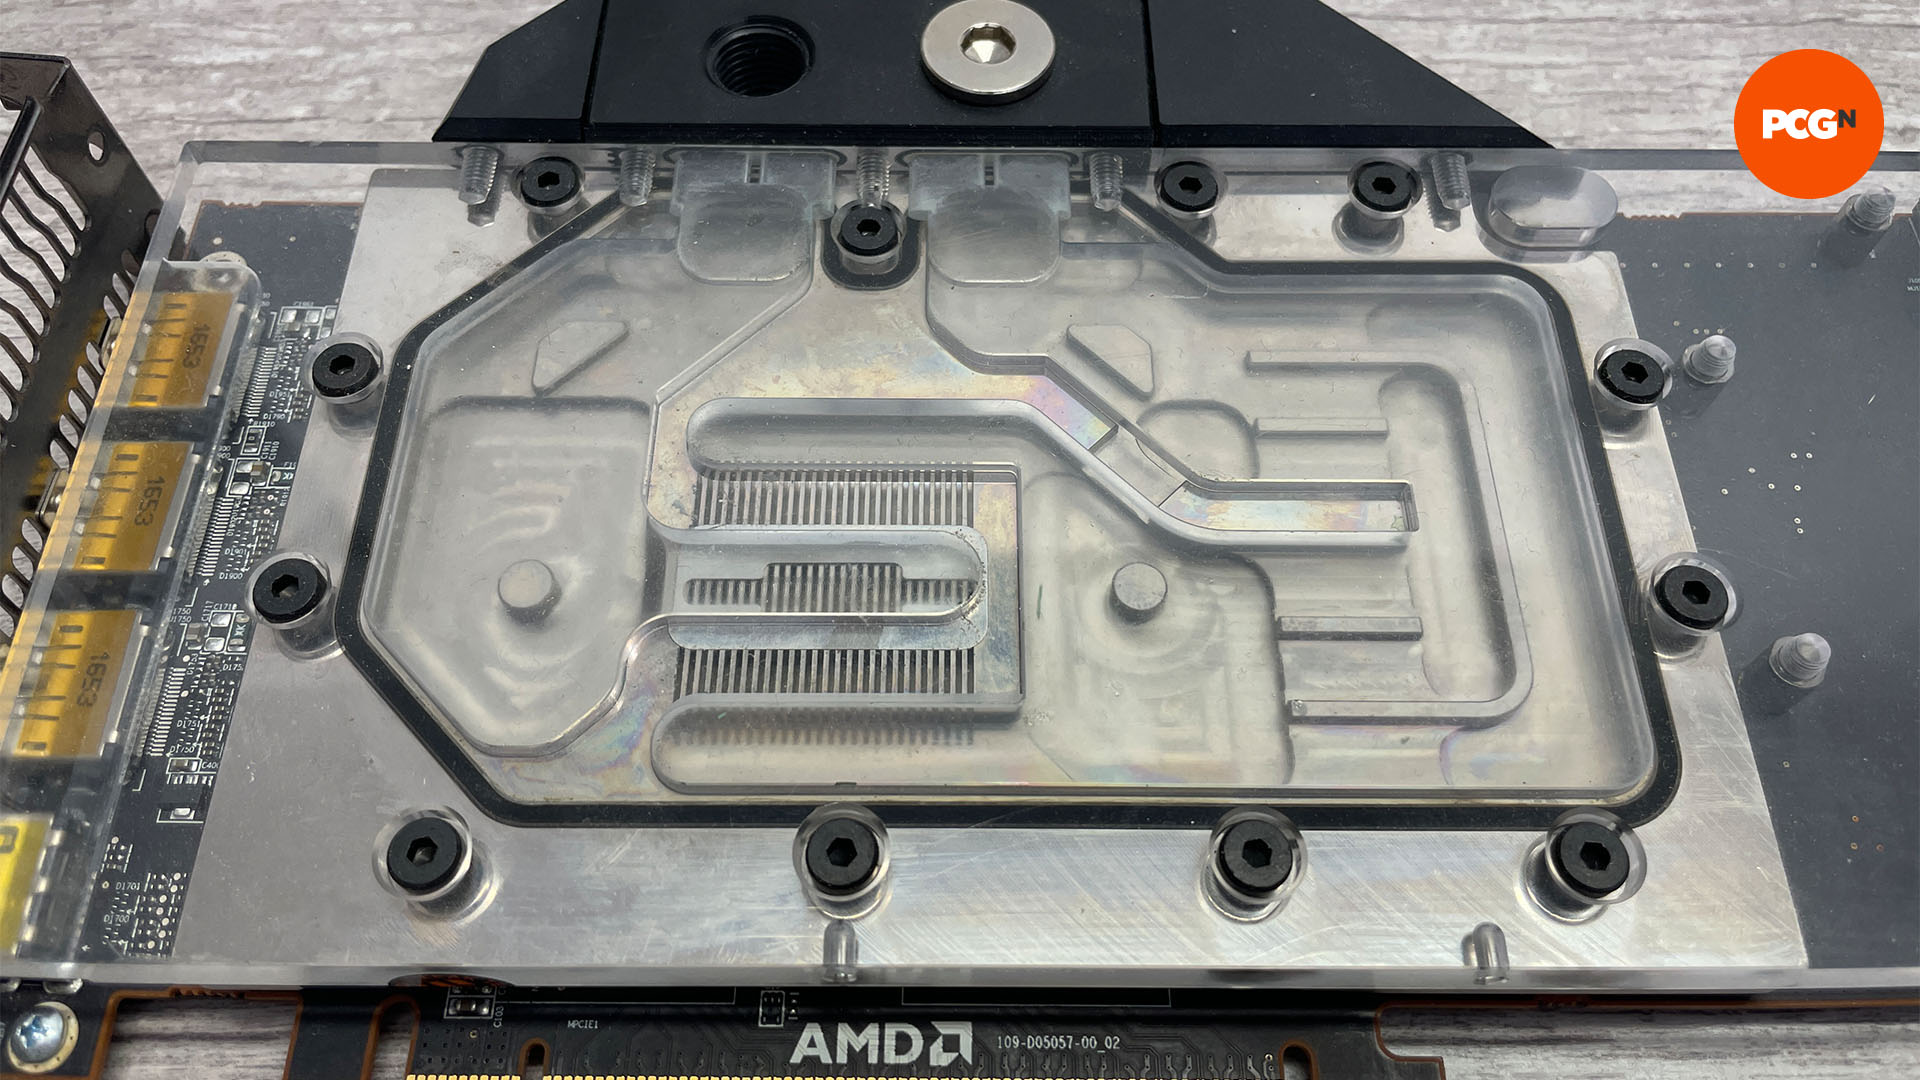 How to clean a waterblock: Use the right cleaner